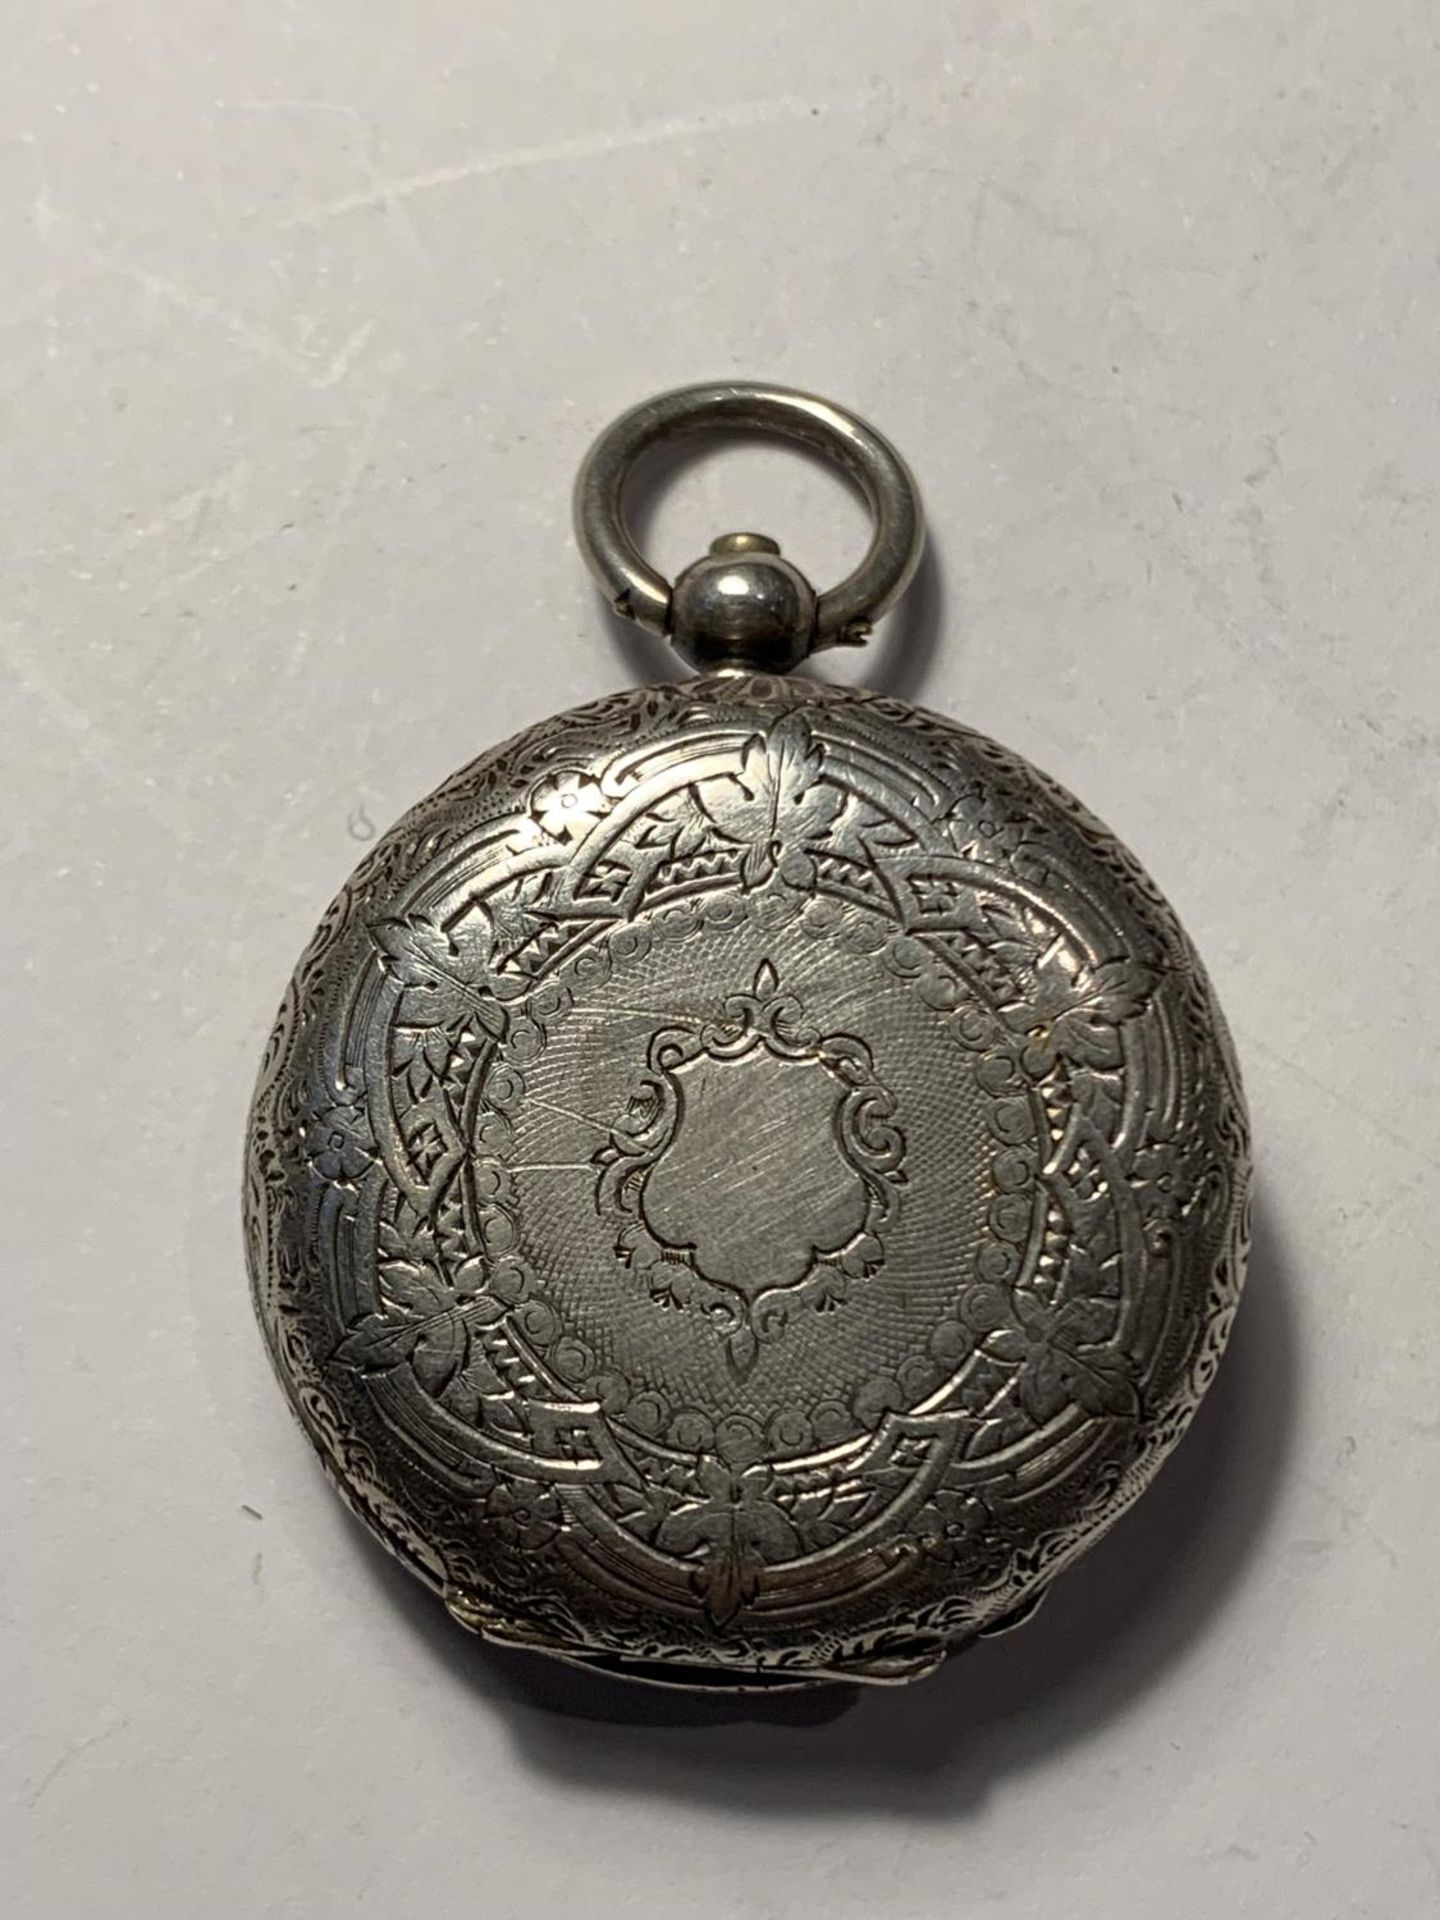 AN ORNATE LADIES SILVER POCKET WATCH - Image 2 of 3